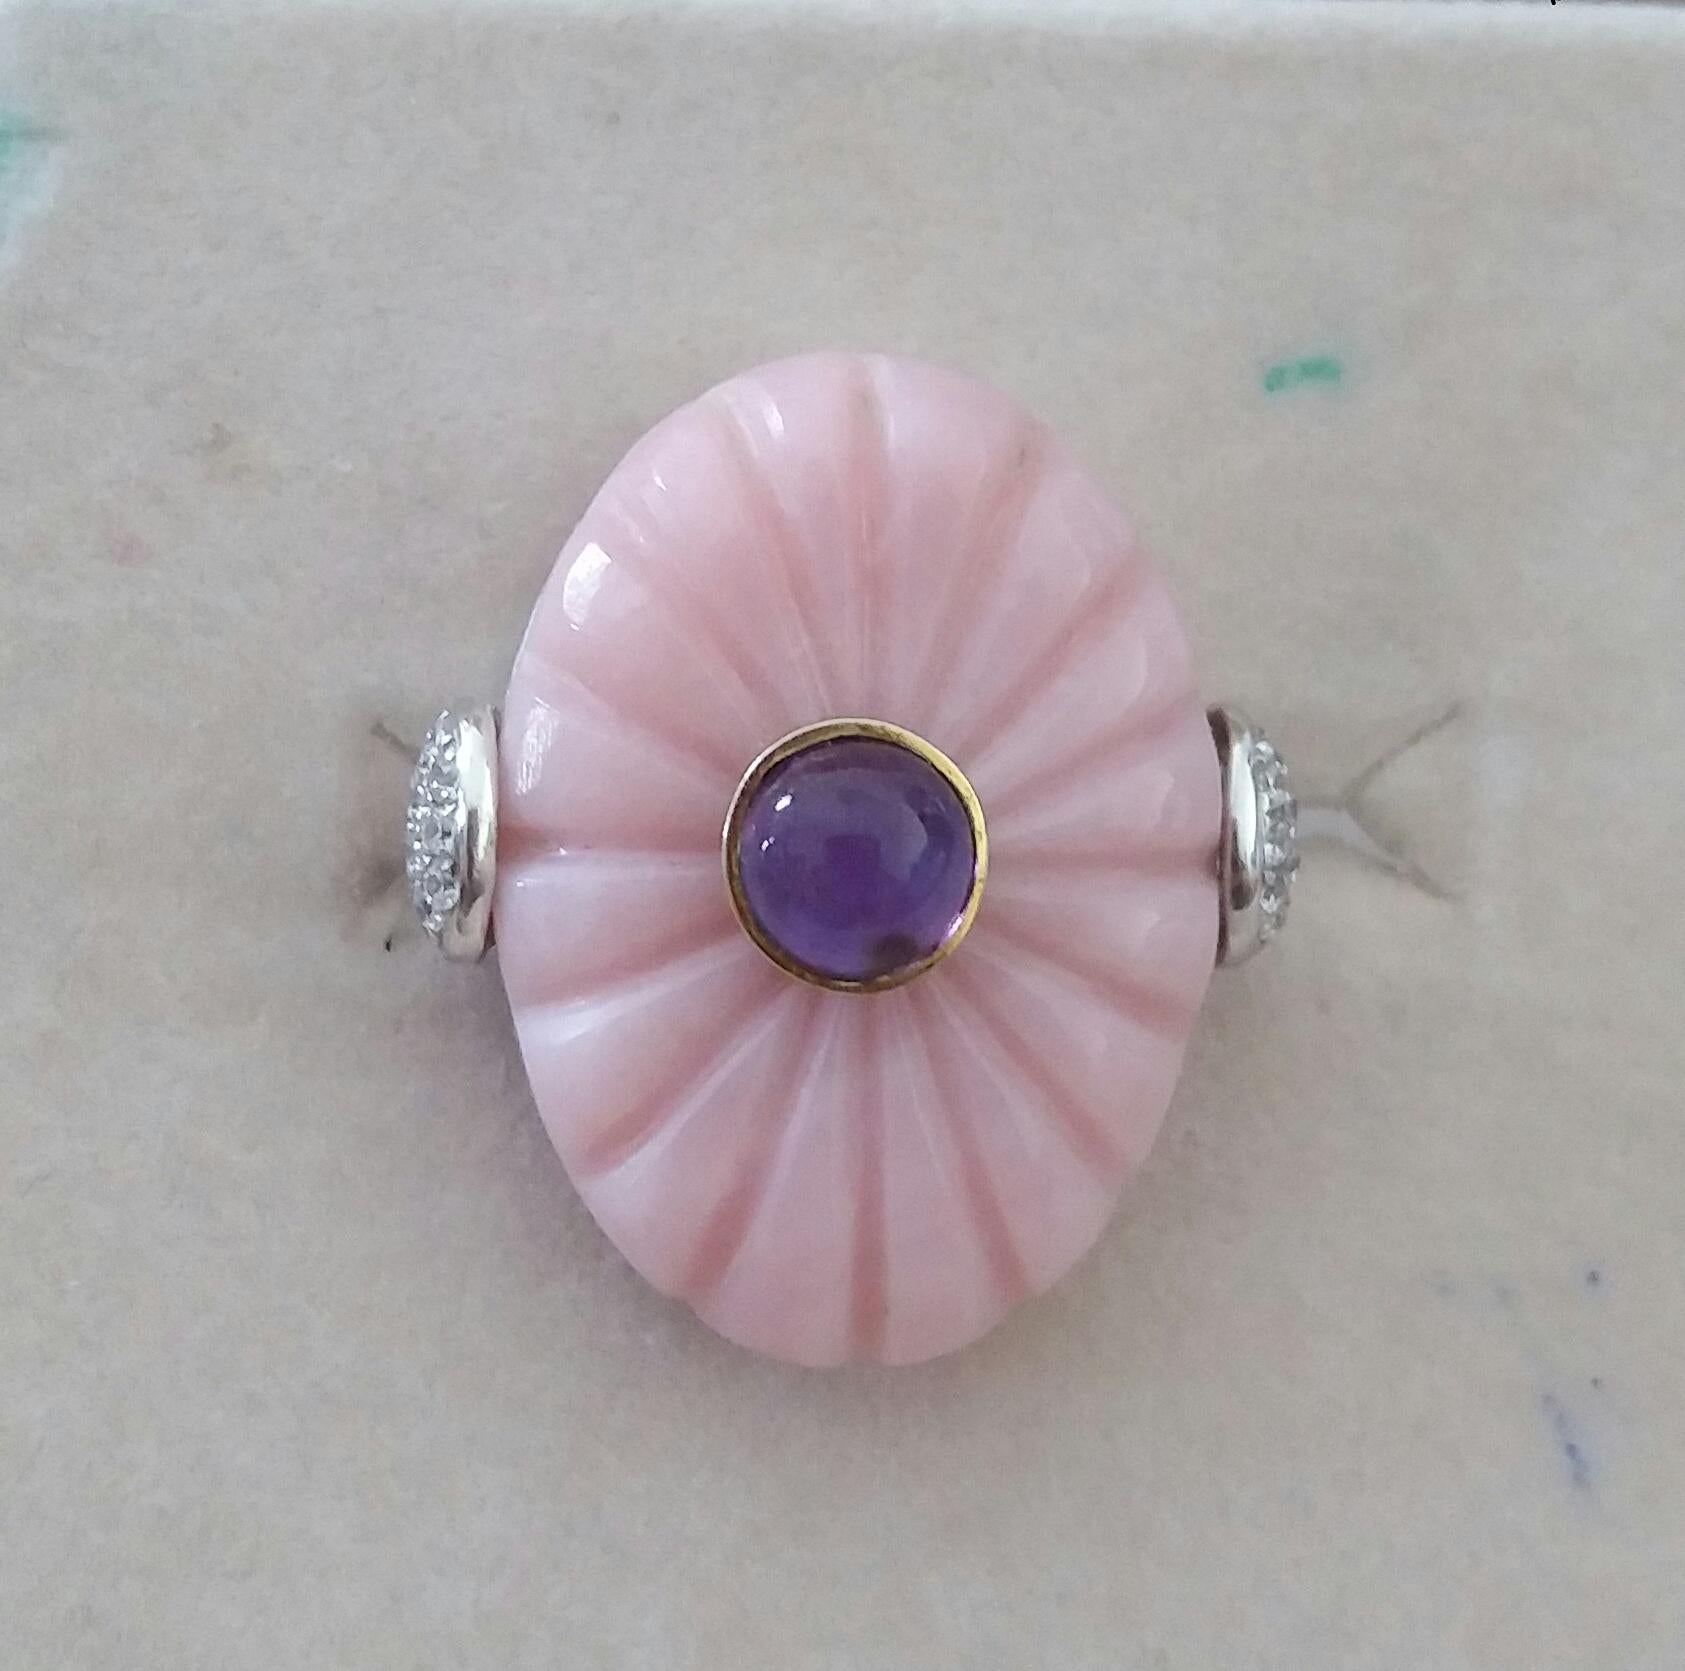 For Sale:  Art Deco Style Carved Pink Opal Genuine Amethyst Cab Gold Diamonds Cocktail Ring 14